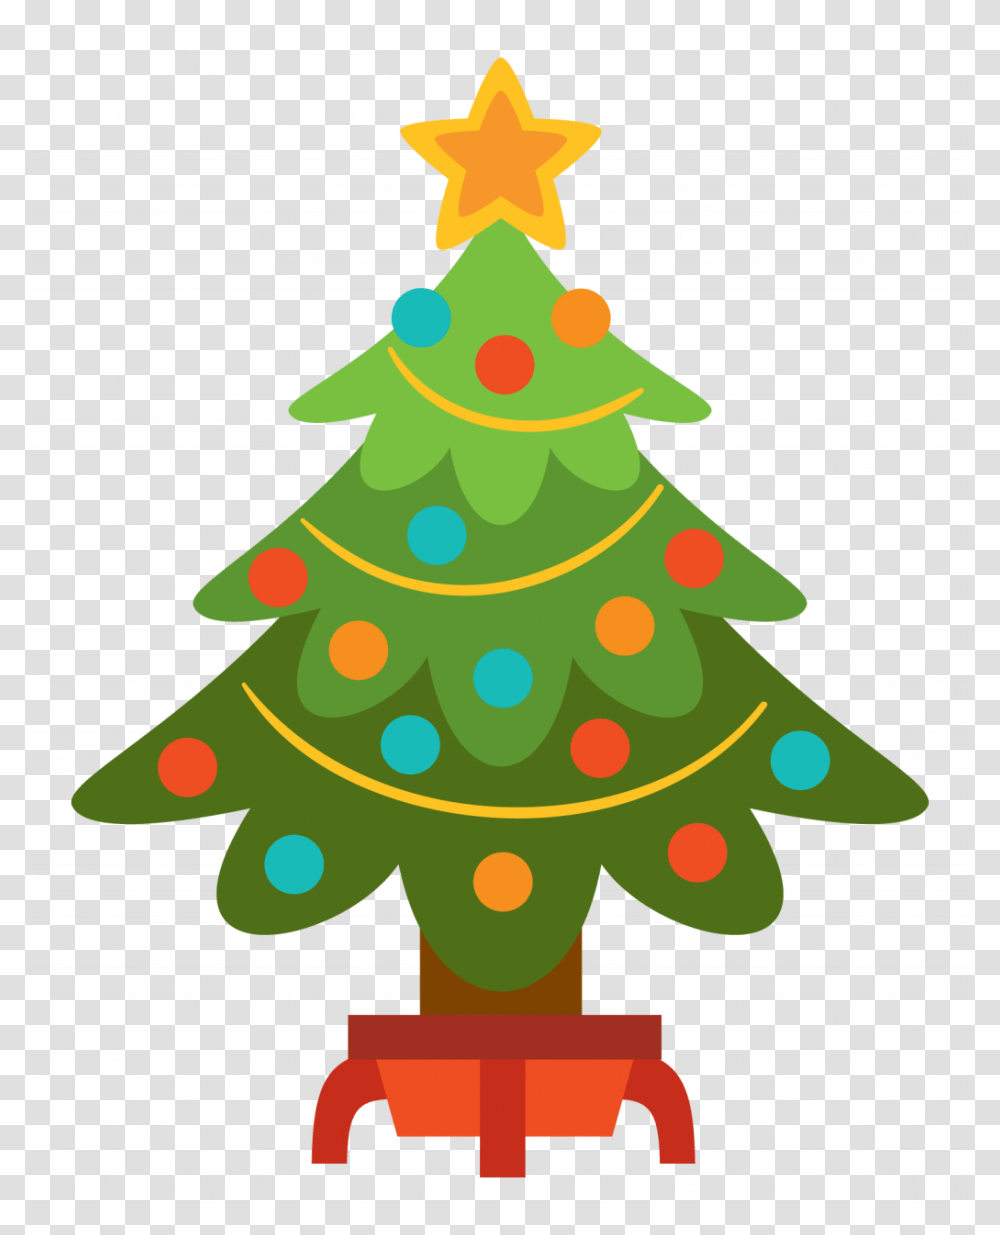 Christmas Tree Clip Art Ofstmas Tree Tops Clipart Branch Trees, Plant, Ornament, Star Symbol Transparent Png